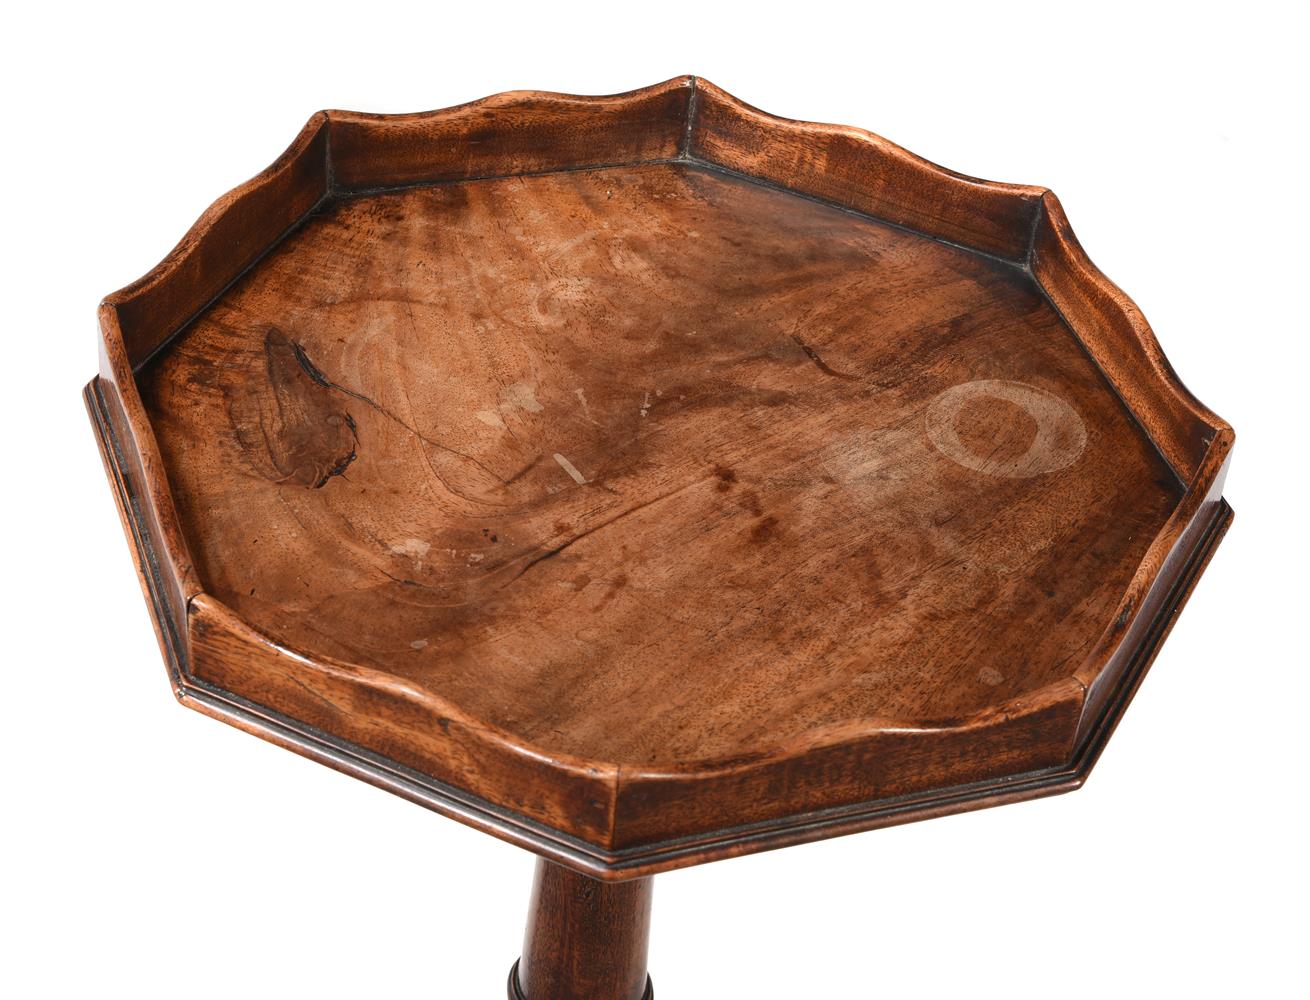 A GEORGE III MAHOGANY OCTAGONAL CANDLE STAND, CIRCA 1770 - Image 2 of 3